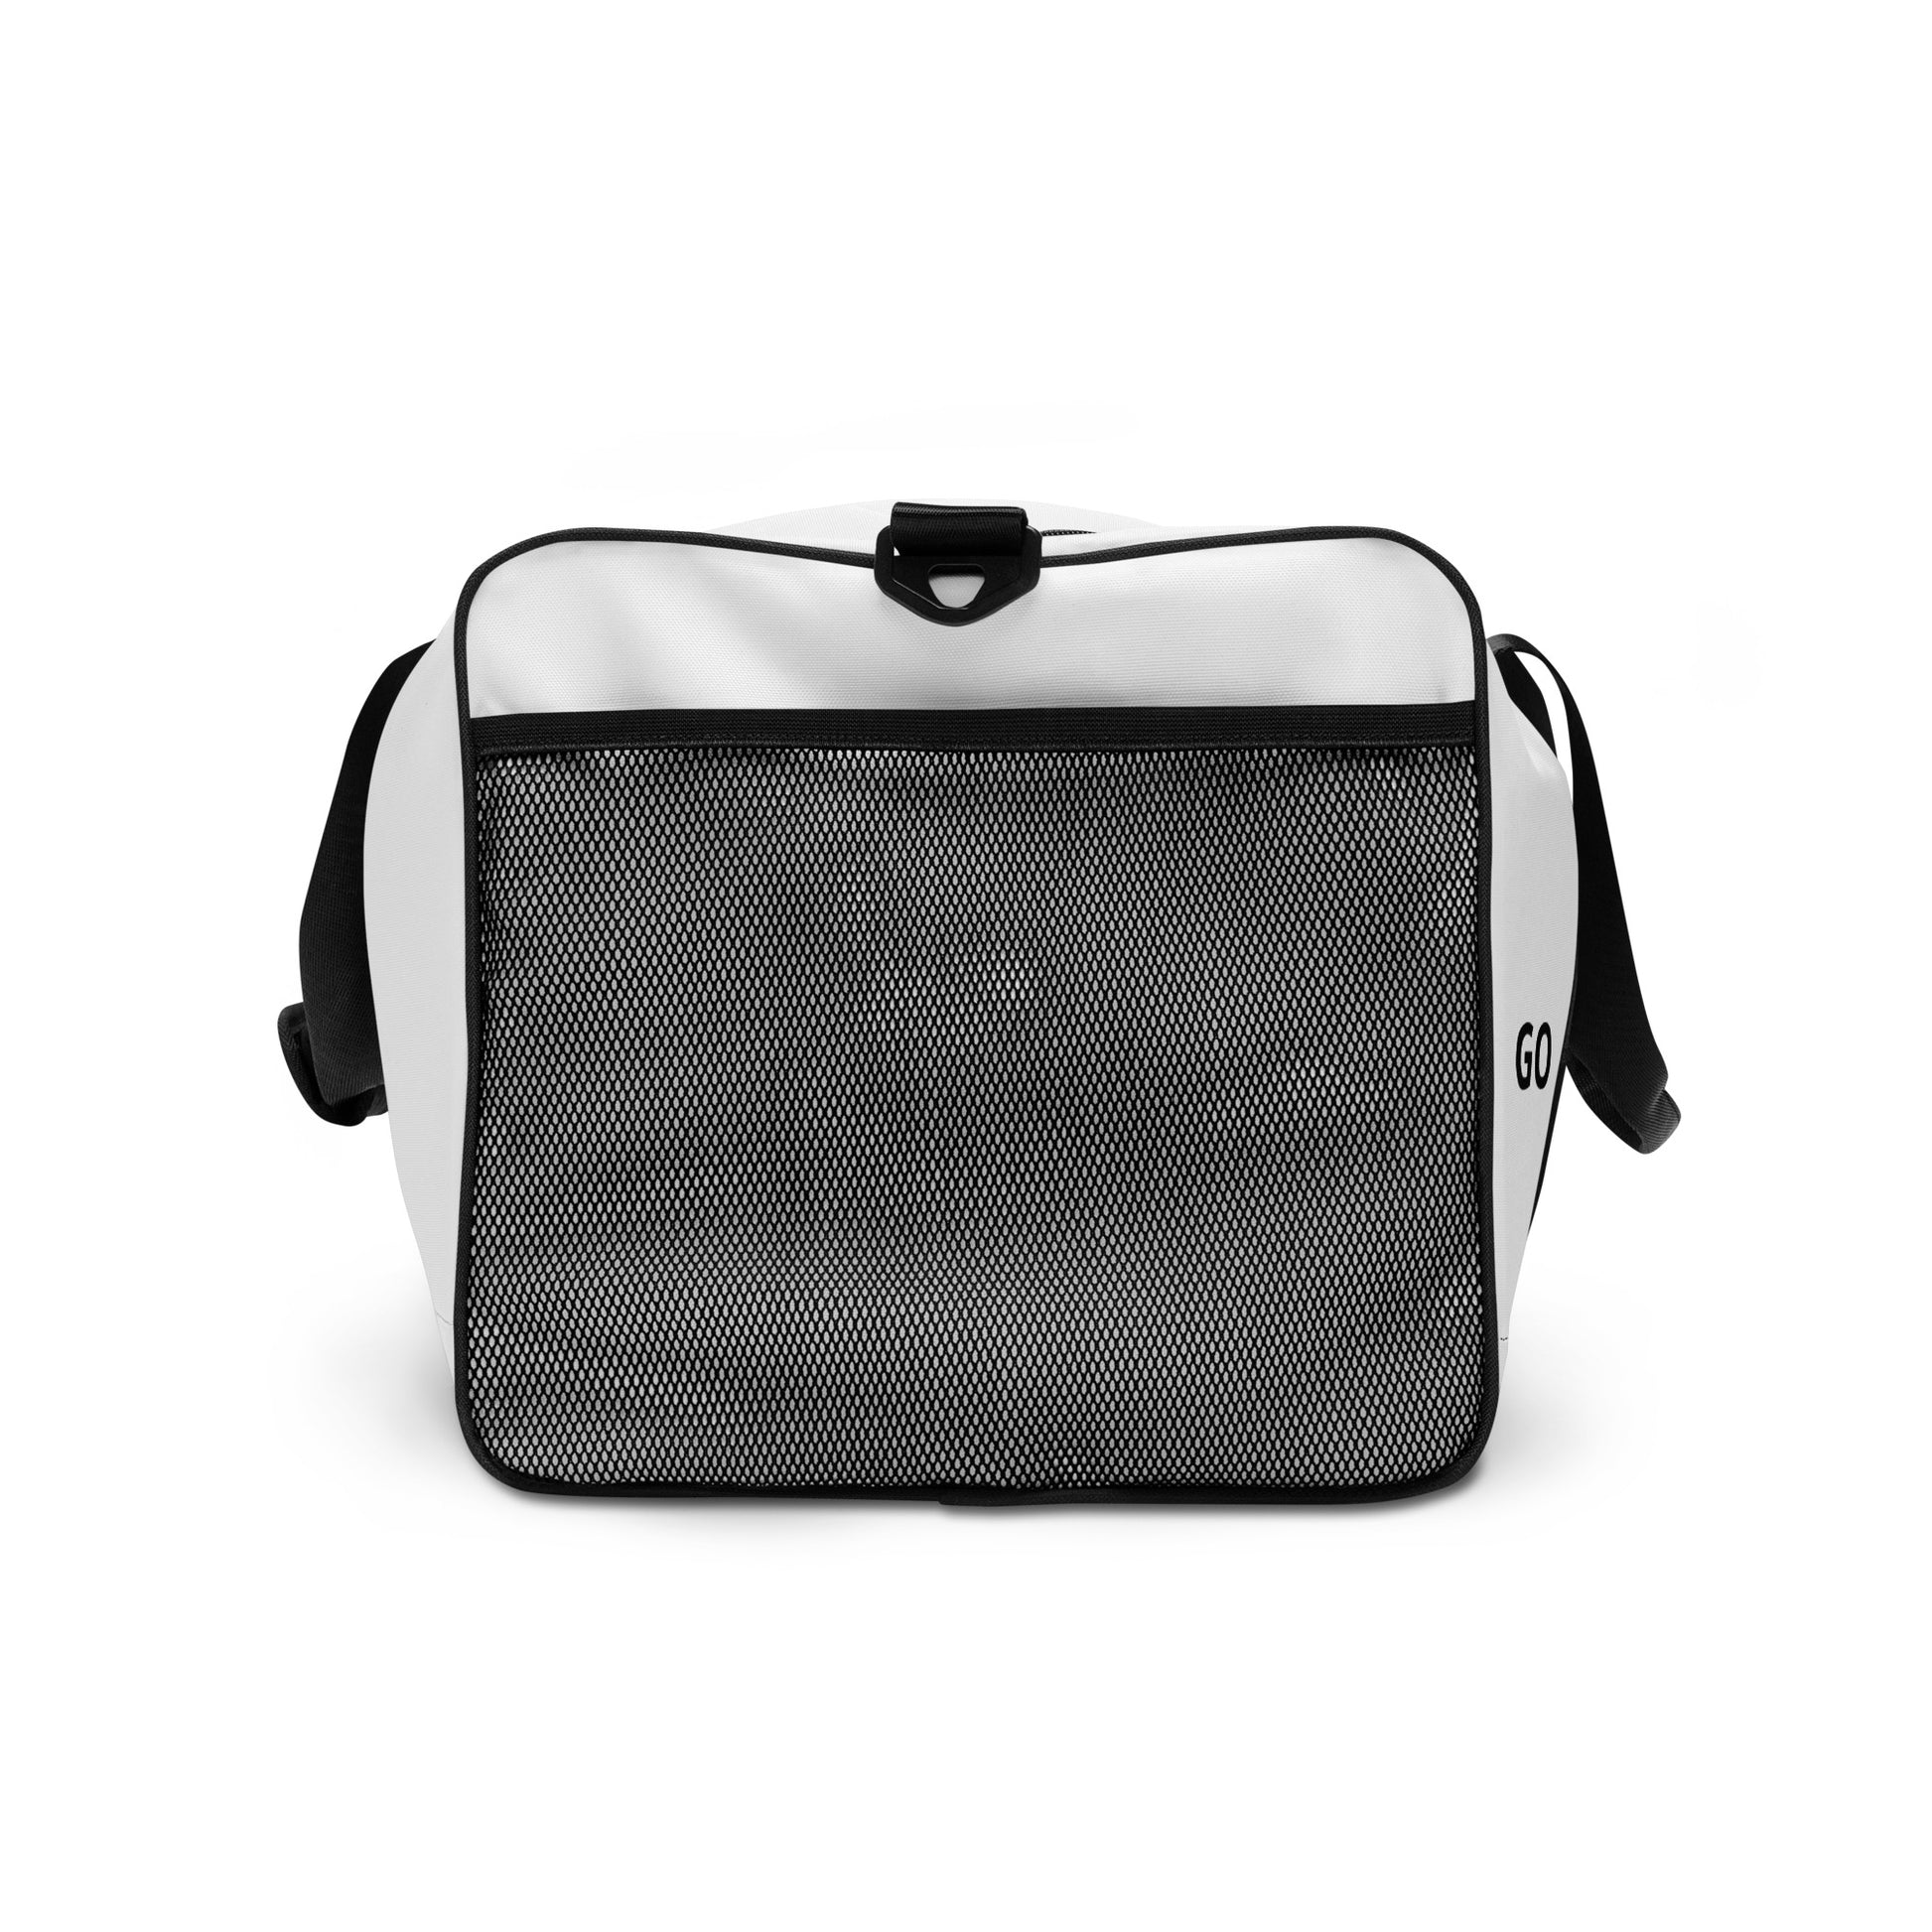 Mesh side for magazines on travel duffle